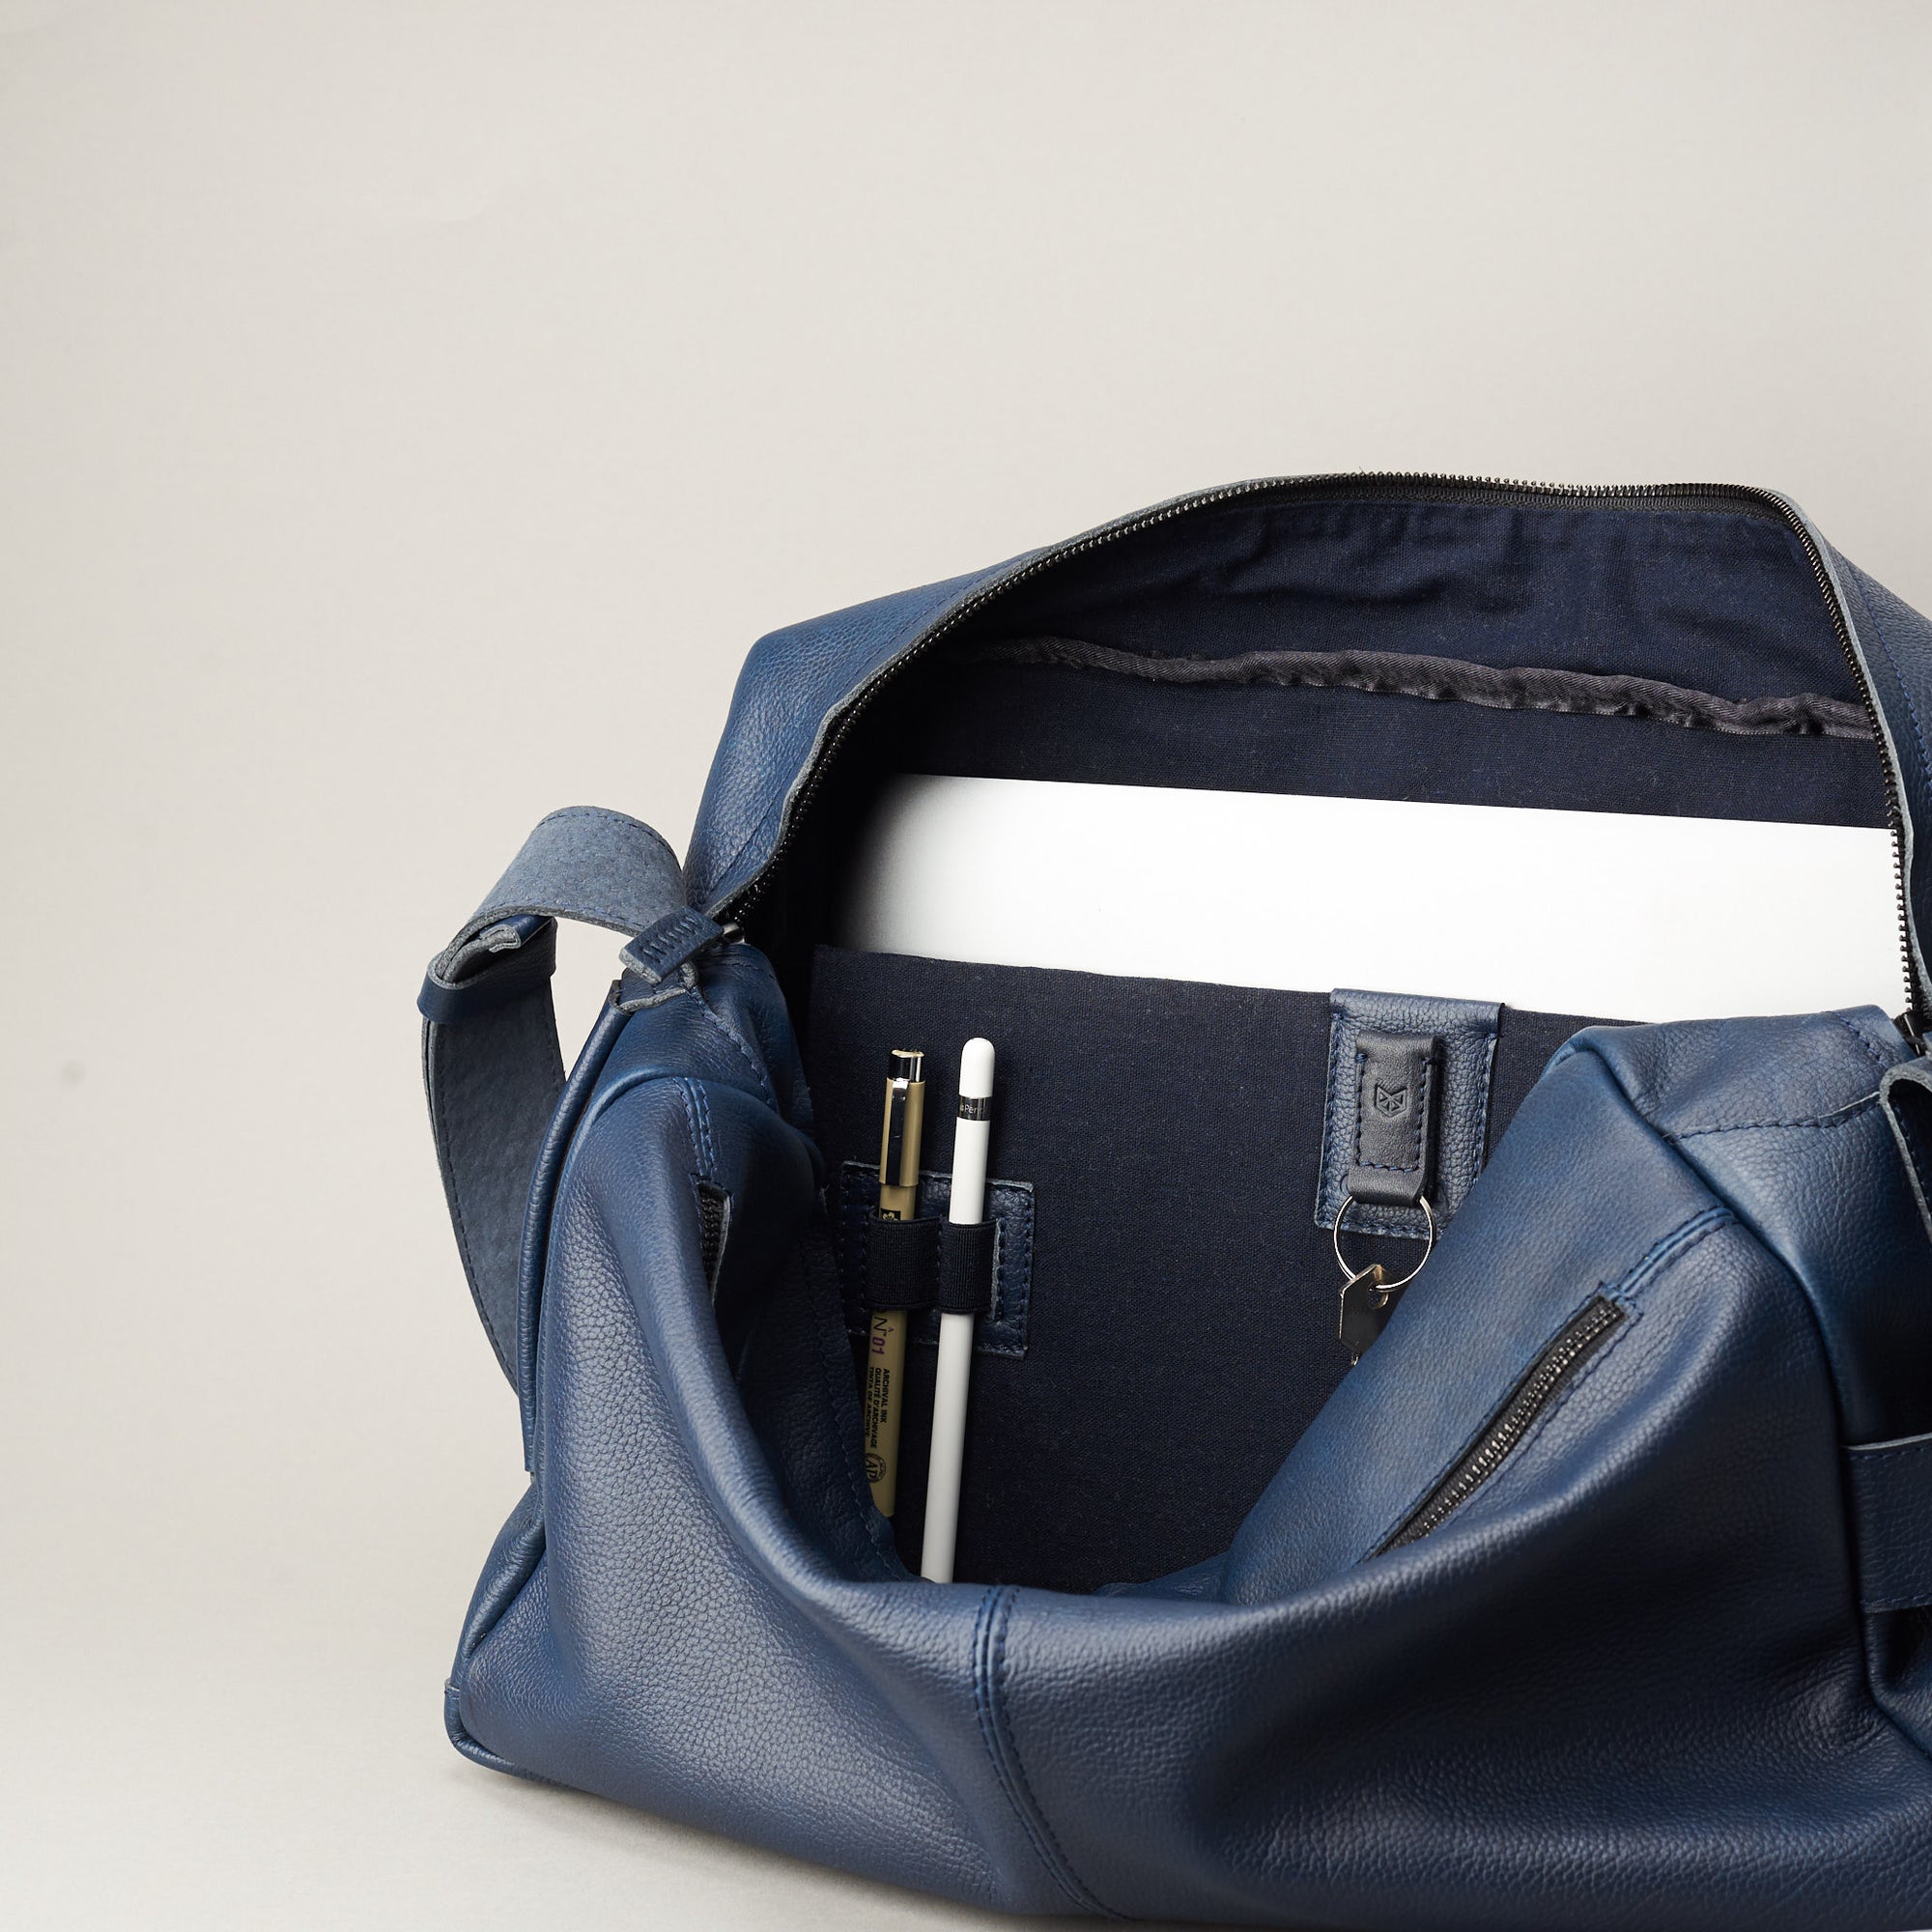 Linen Interior. Addox Blue cyclist shoulder tech bag for Men by Capra Leather